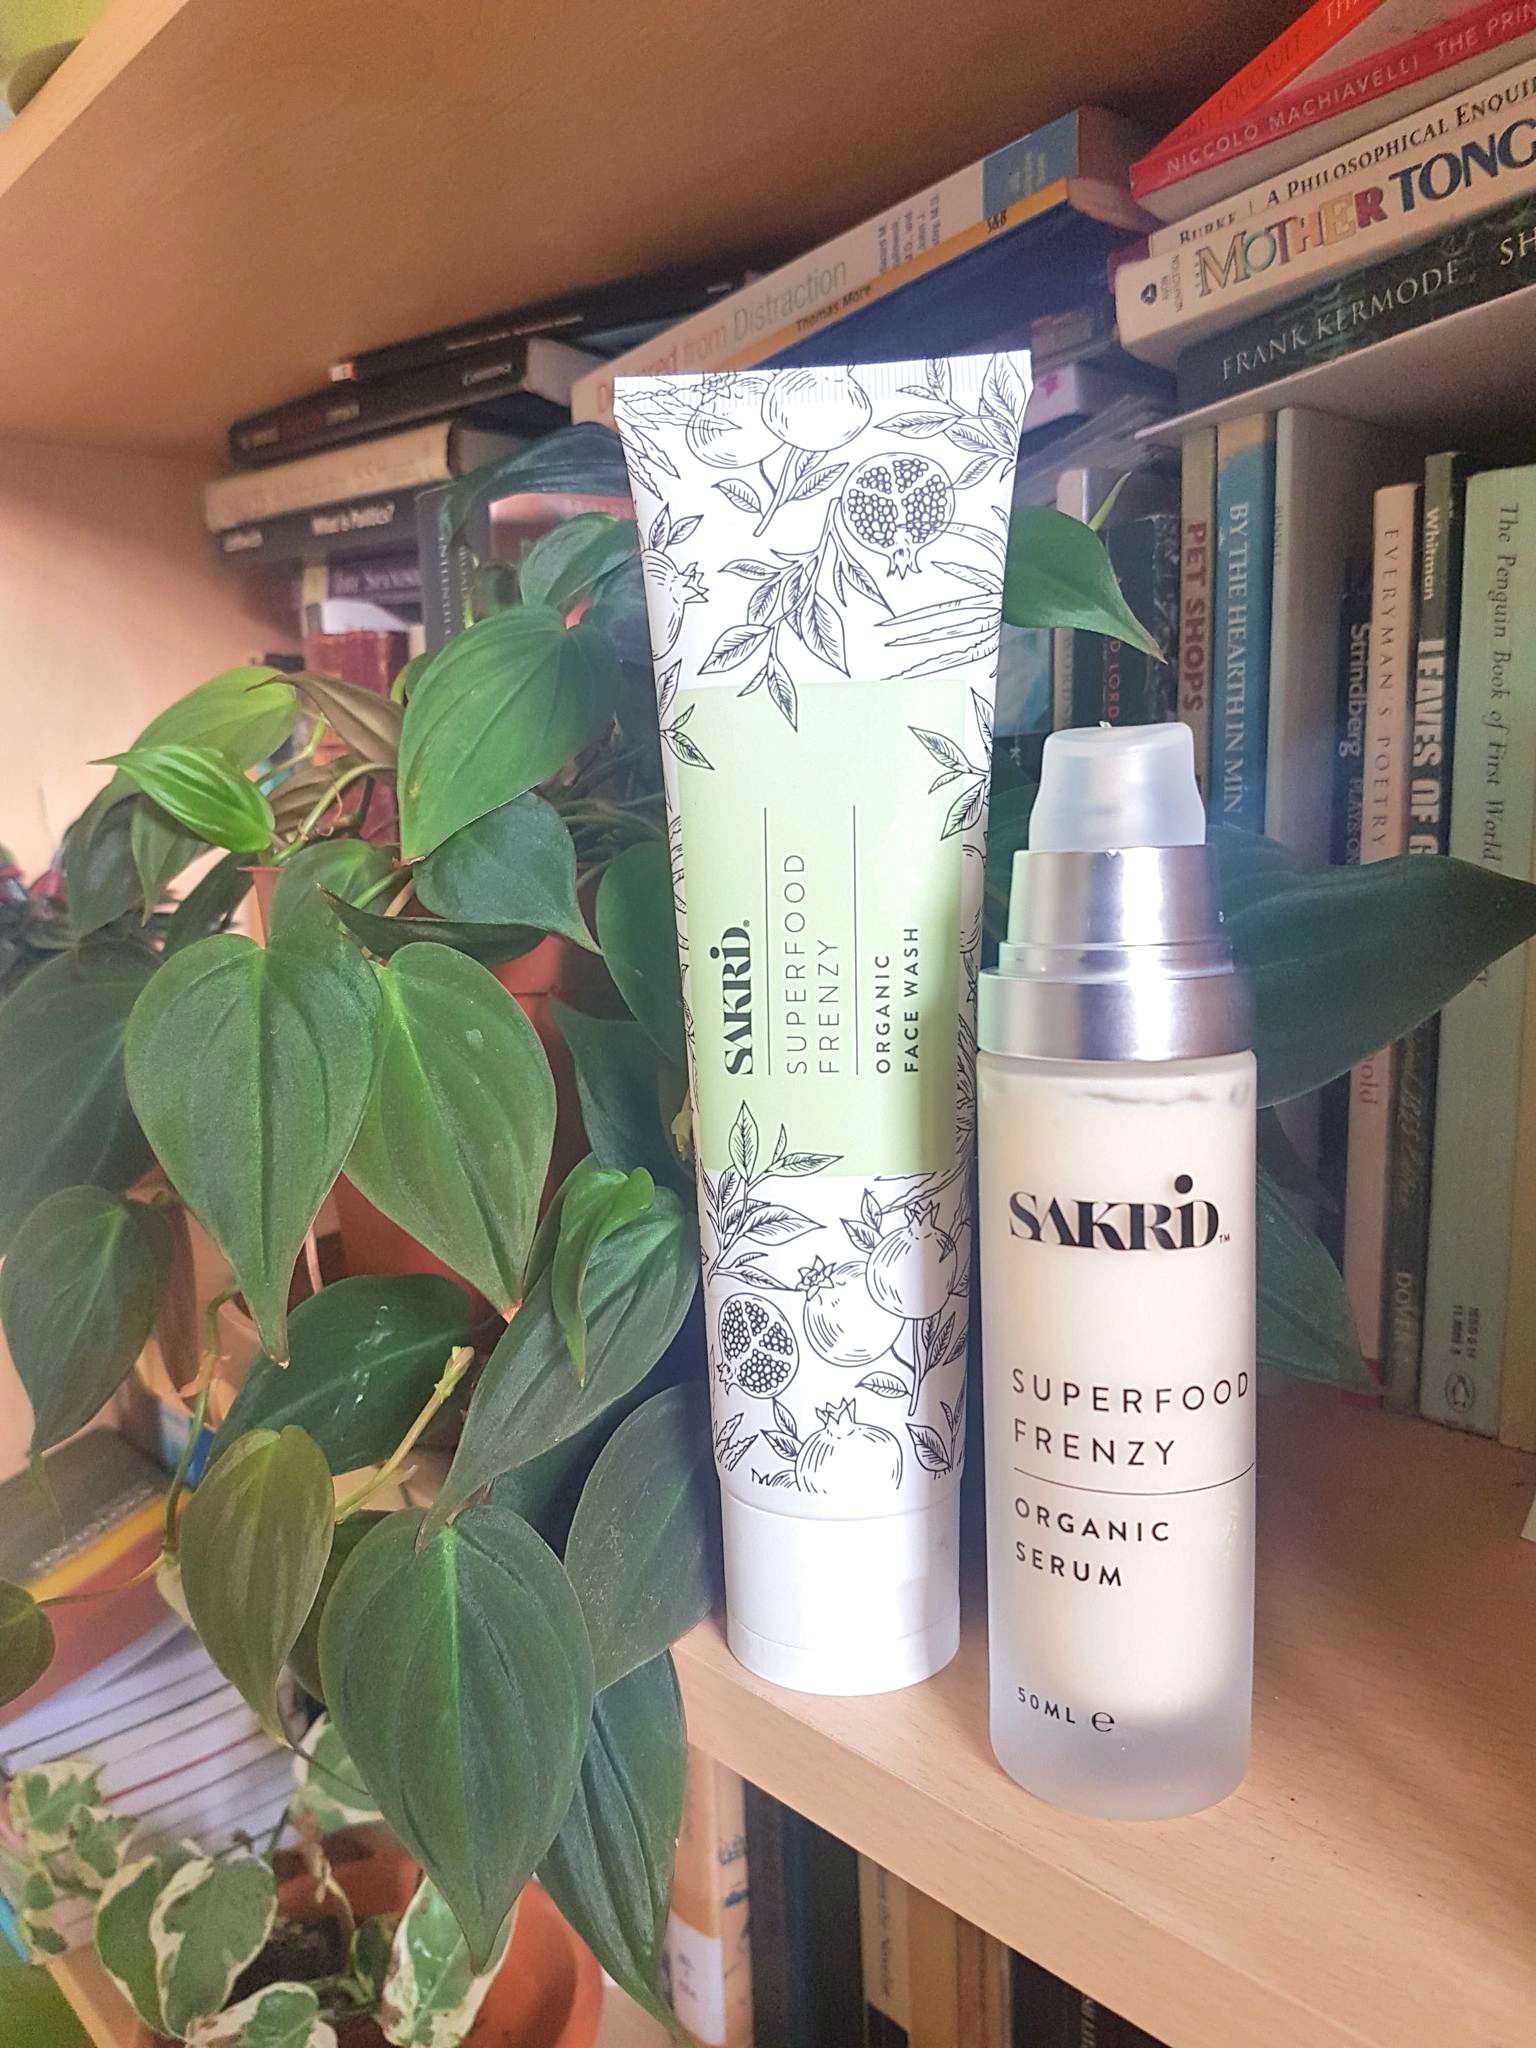 Sakrid Beauty Superfood Frenzy Organic Face Wash and Serum on a bookshelf with books and plants